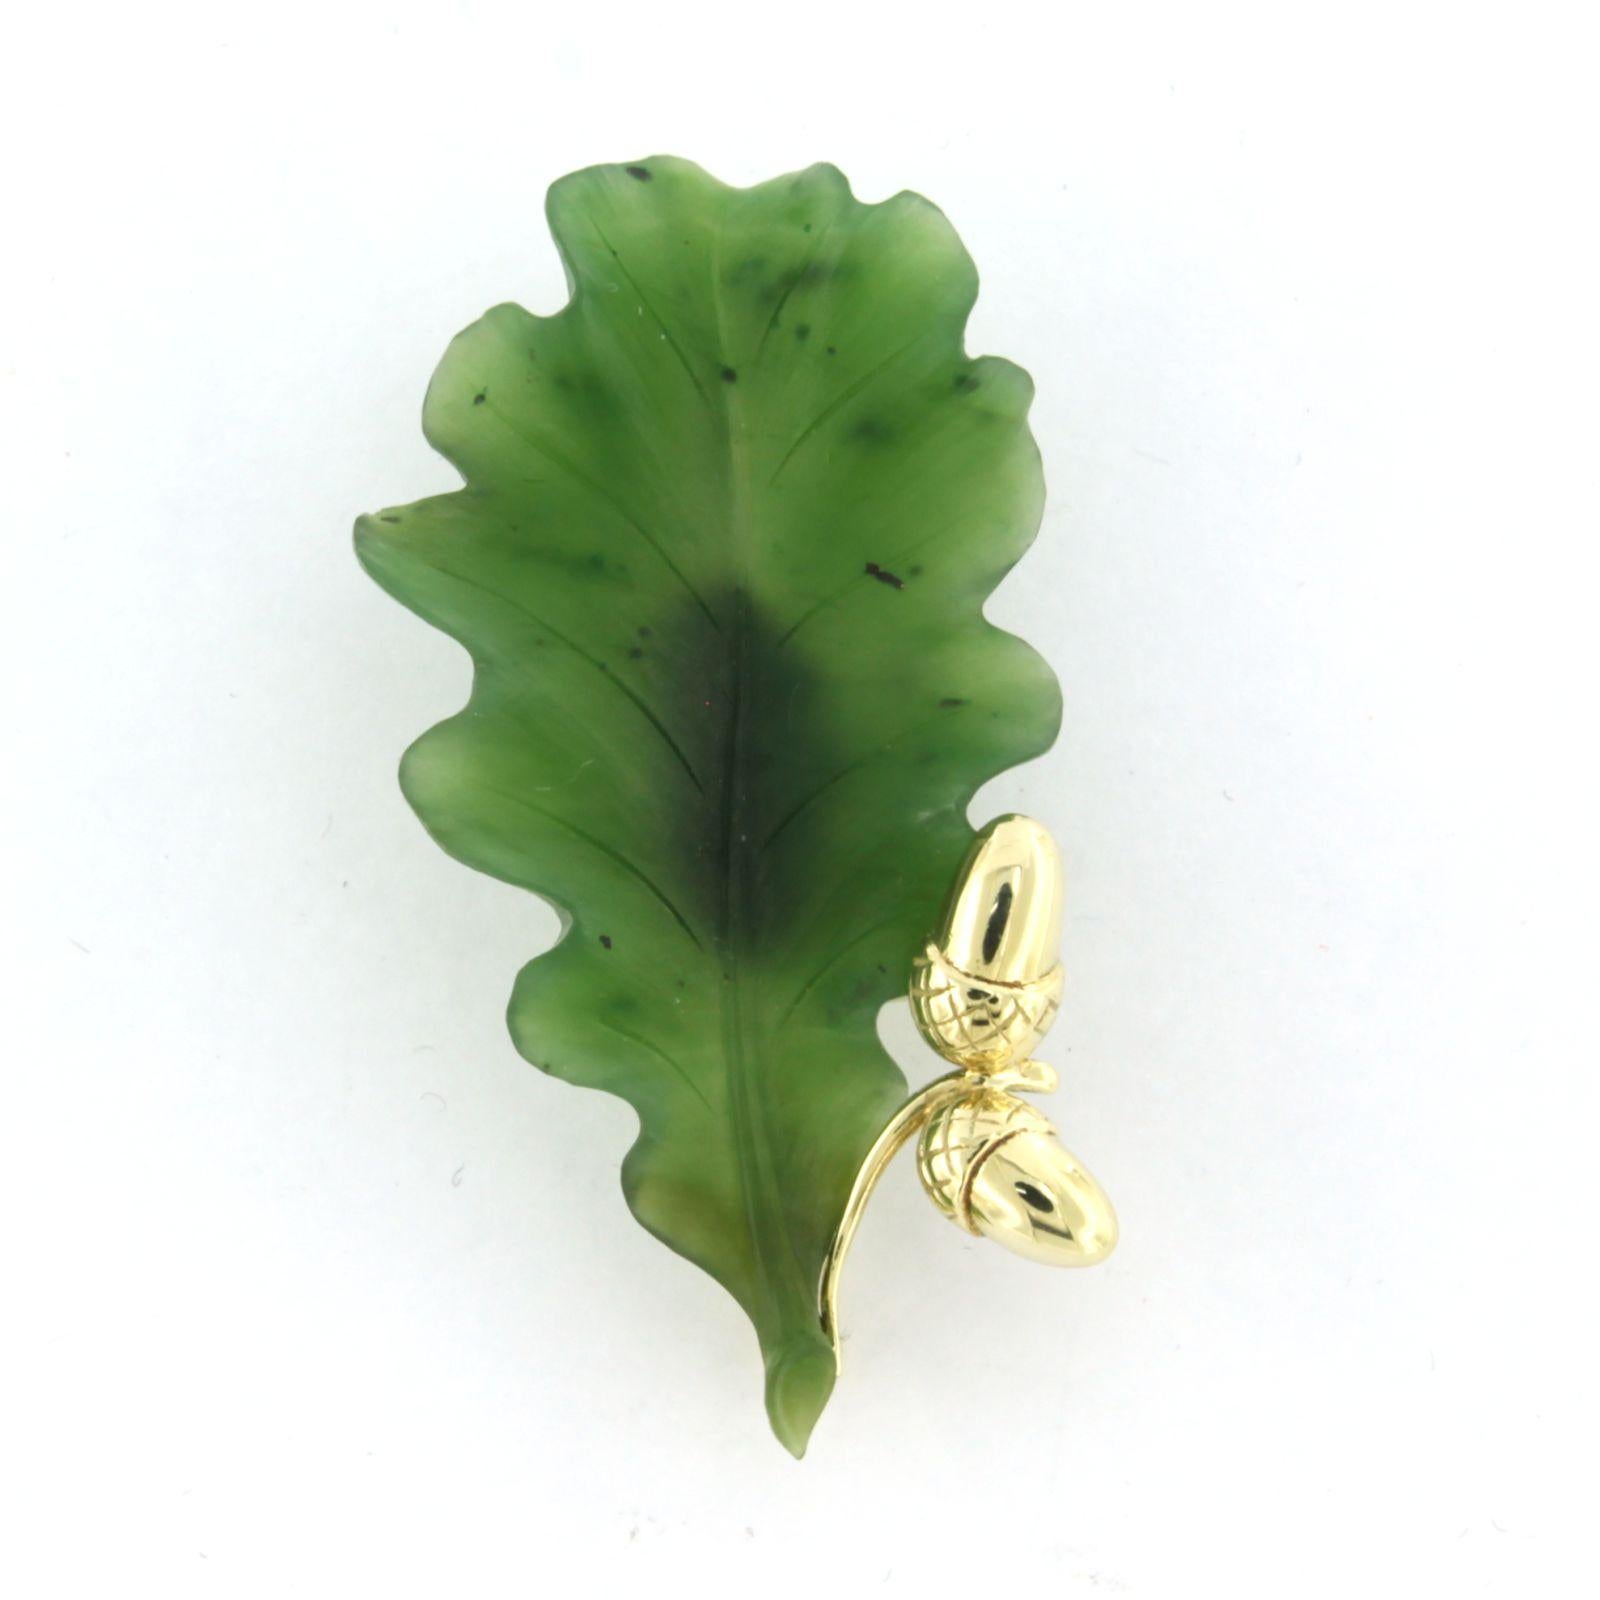 14k yellow gold brooch in the shape of a leaf set with moss agate

Detailed description

the size of the brooch is 4.6 cm by 2.5 cm wide

weight 8.8 grams

set with

- 1 x 4.6 cm x 2.5 cm leaf shape cut agate

color green
purity VS/SI
Gemstones have